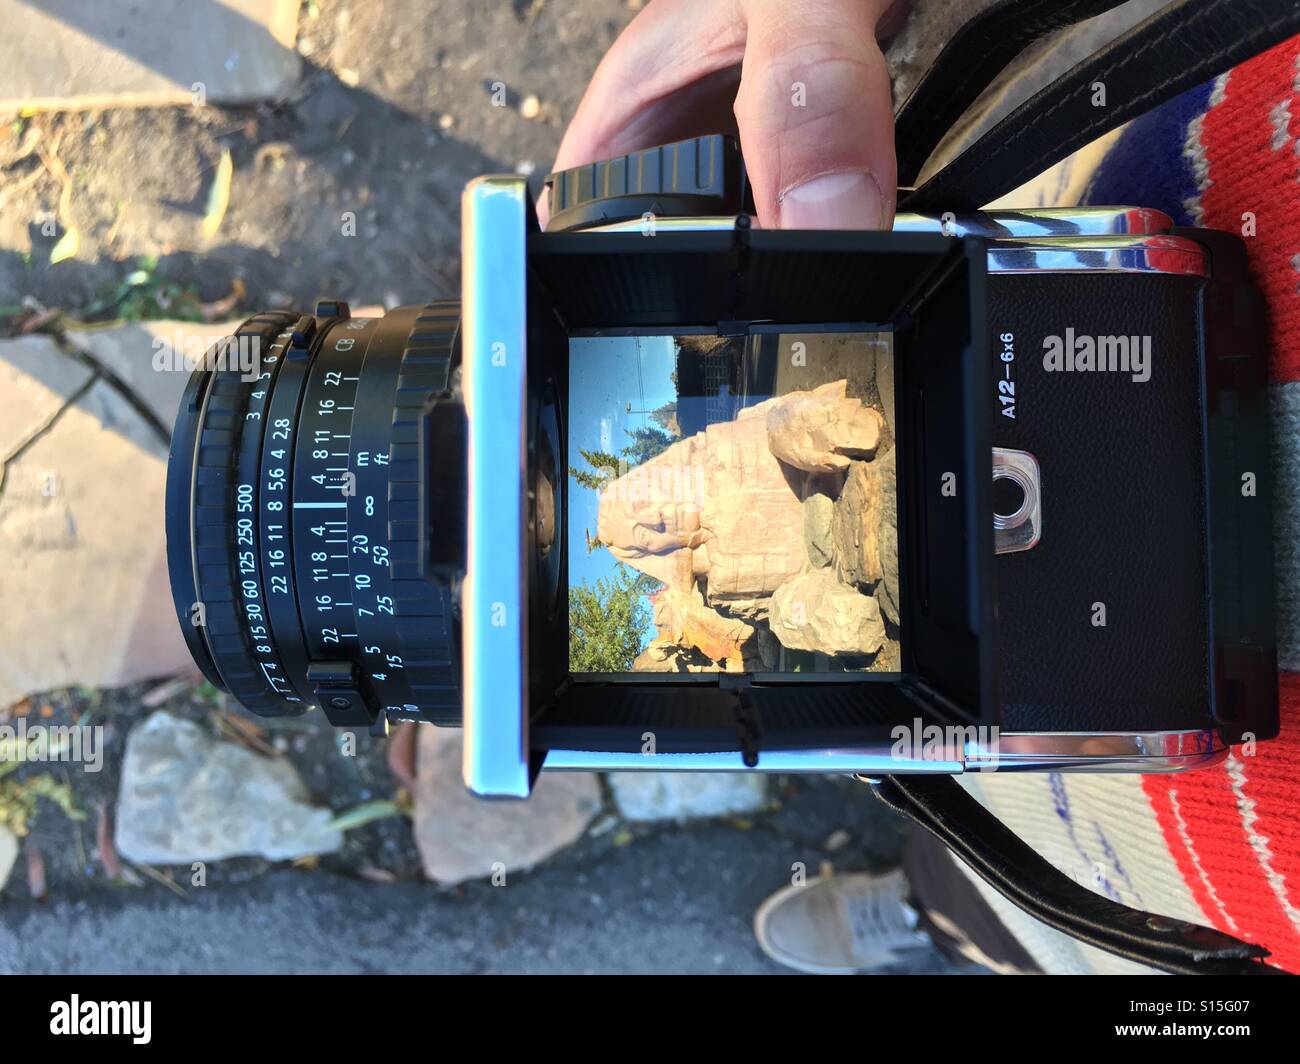 A sphinx is seen through the waist level viewfinder of a Hasselblad film camera. Stock Photo